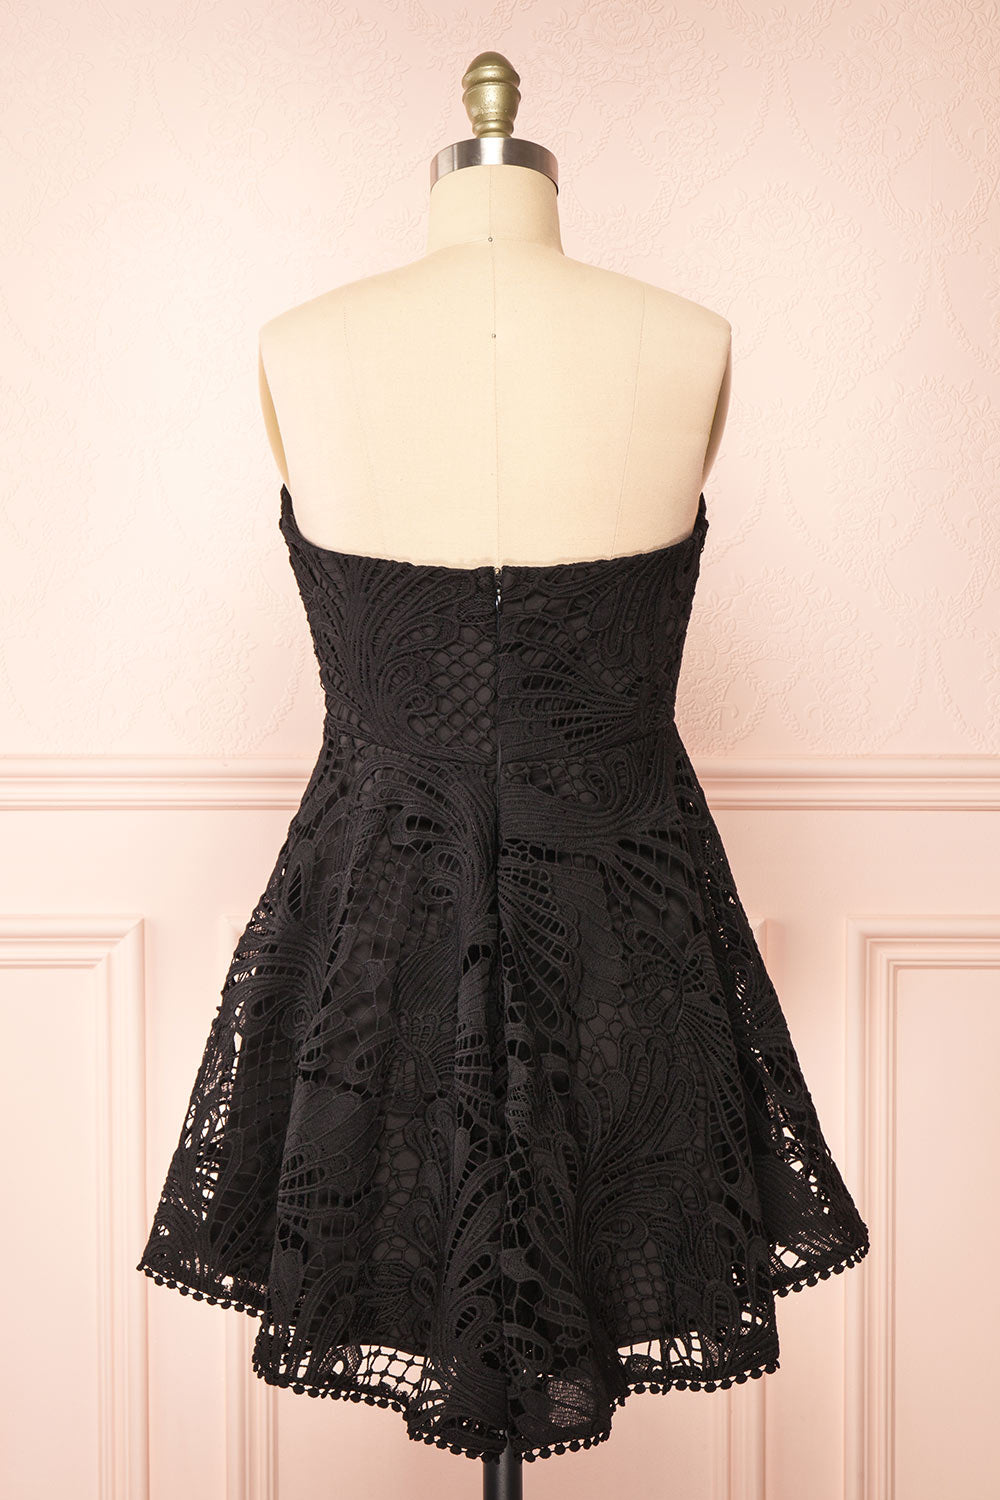 Strapless Lace Dress -  Canada